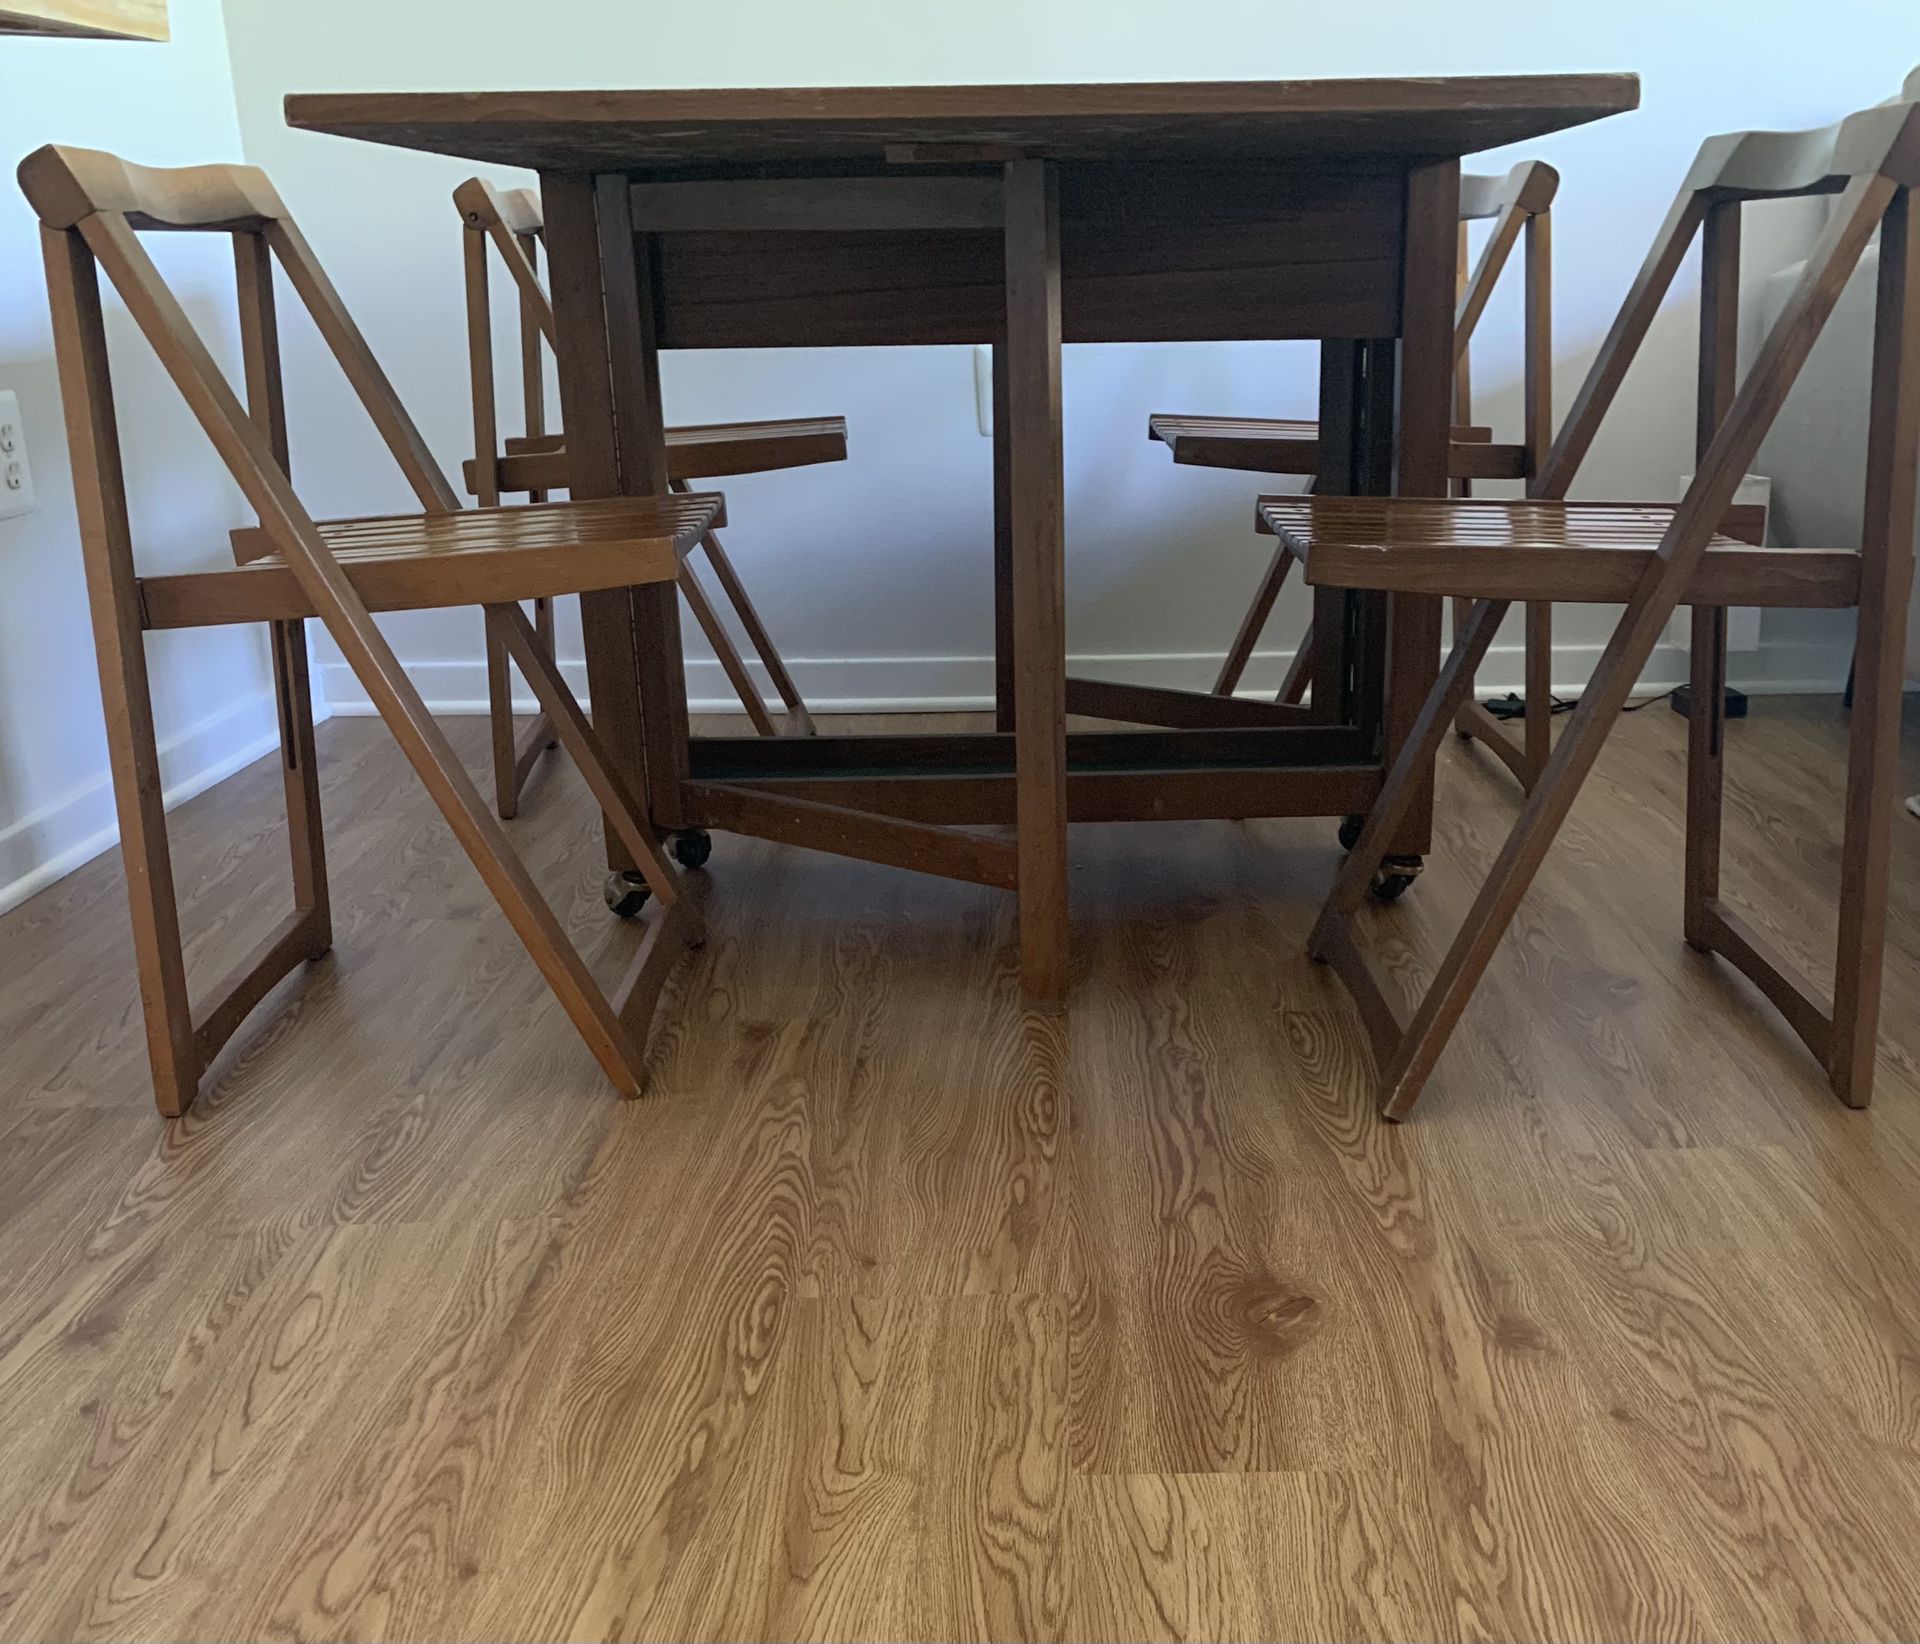 Antique Wood Dining Set w/ 4 Foldable Chairs